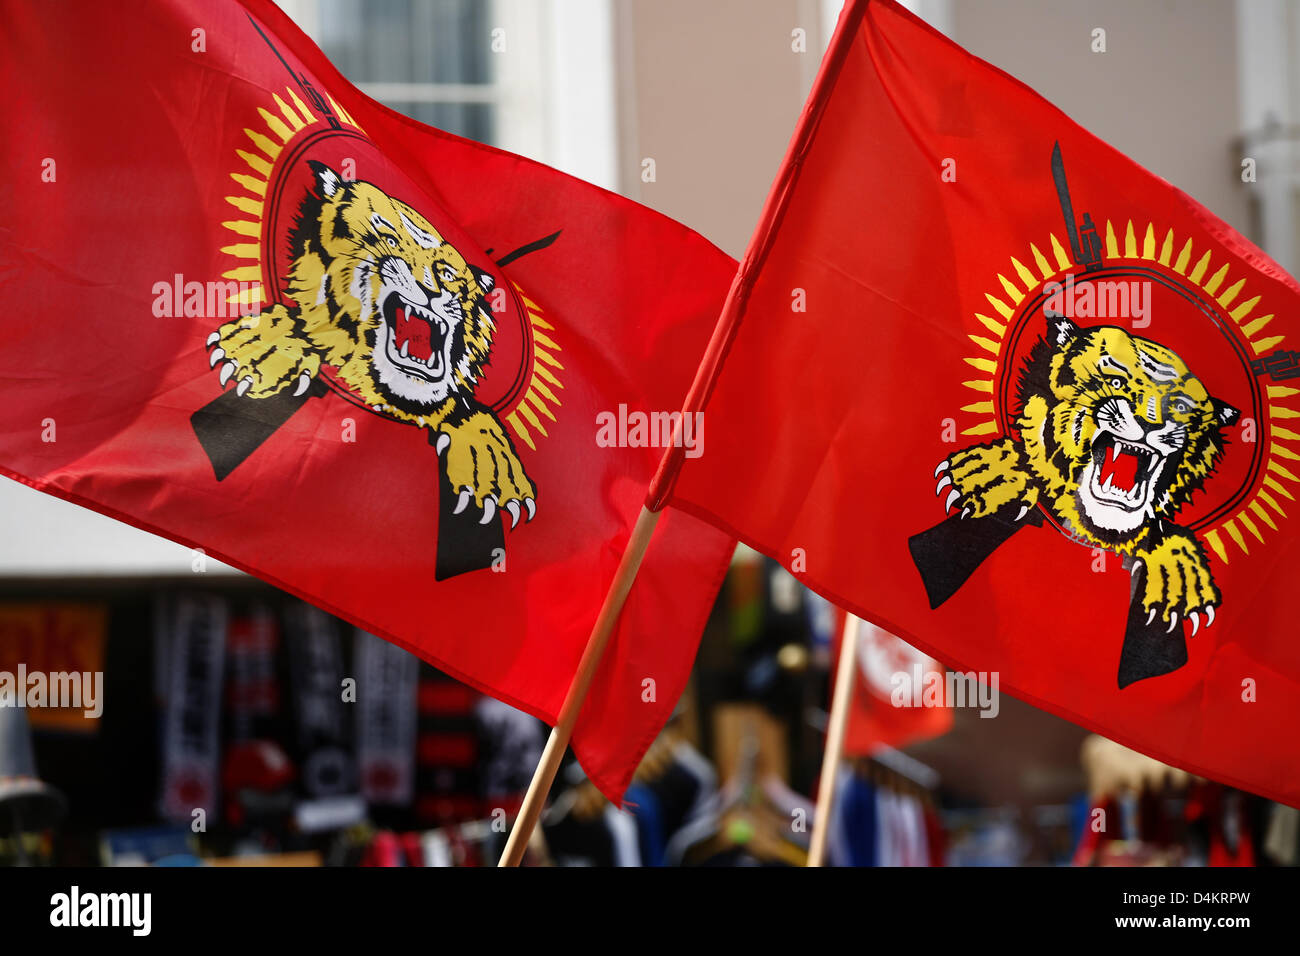 Flags of the Liberation Tigers of Tamil Eelam (LTTE) are waved at a protest of the Tamil Tigers in Frankfurt Main, Germany, 01 May 2009. The Tamils demonstrate for an own state and independence from Sri Lanka. However, the LTTE is a militant organisation and is alo proscribed as a terrorist organisations due to suicide bombings. Photo: Wolfram Steinberg Stock Photo